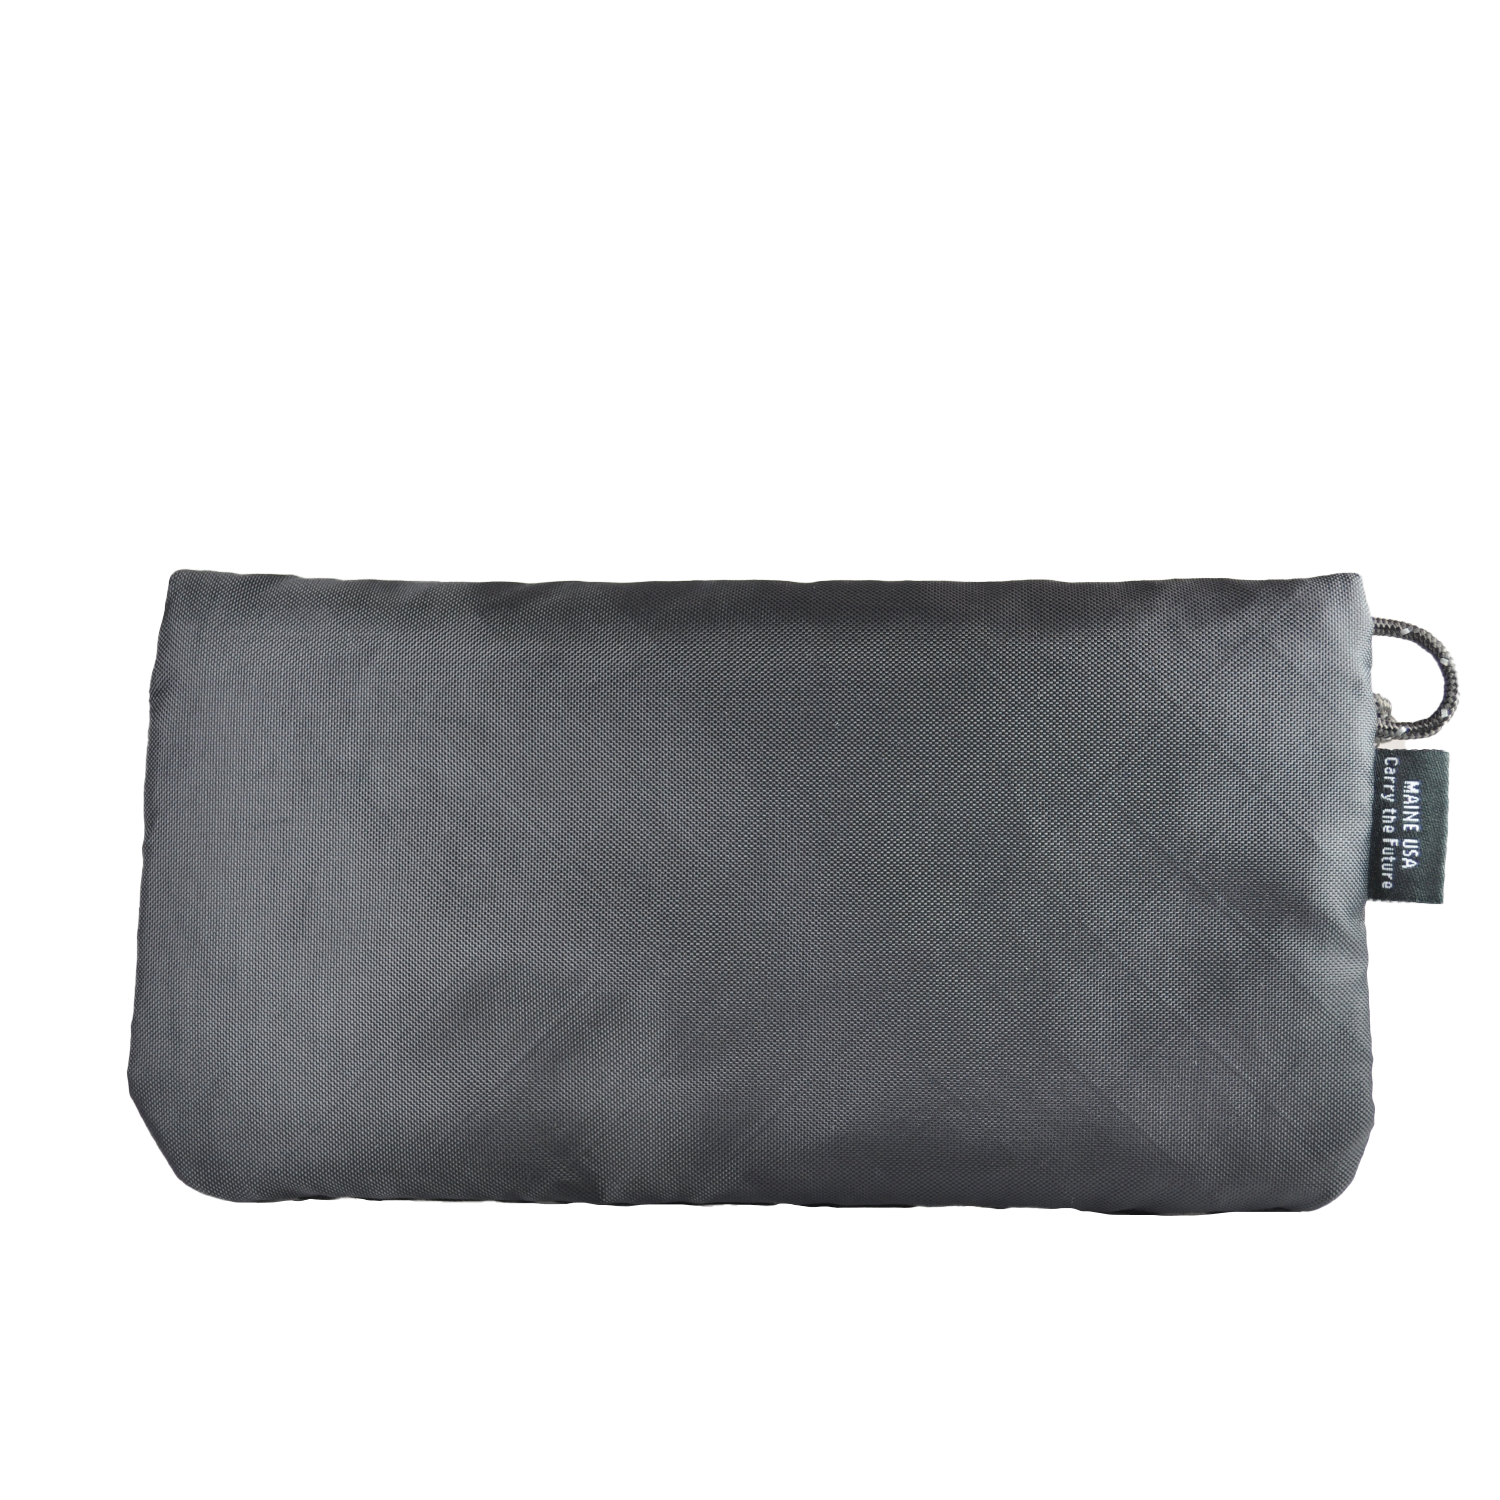 Flowfold Creator Large Zippered Women's Wallet For Cash, Cards, and Phone Jet Black